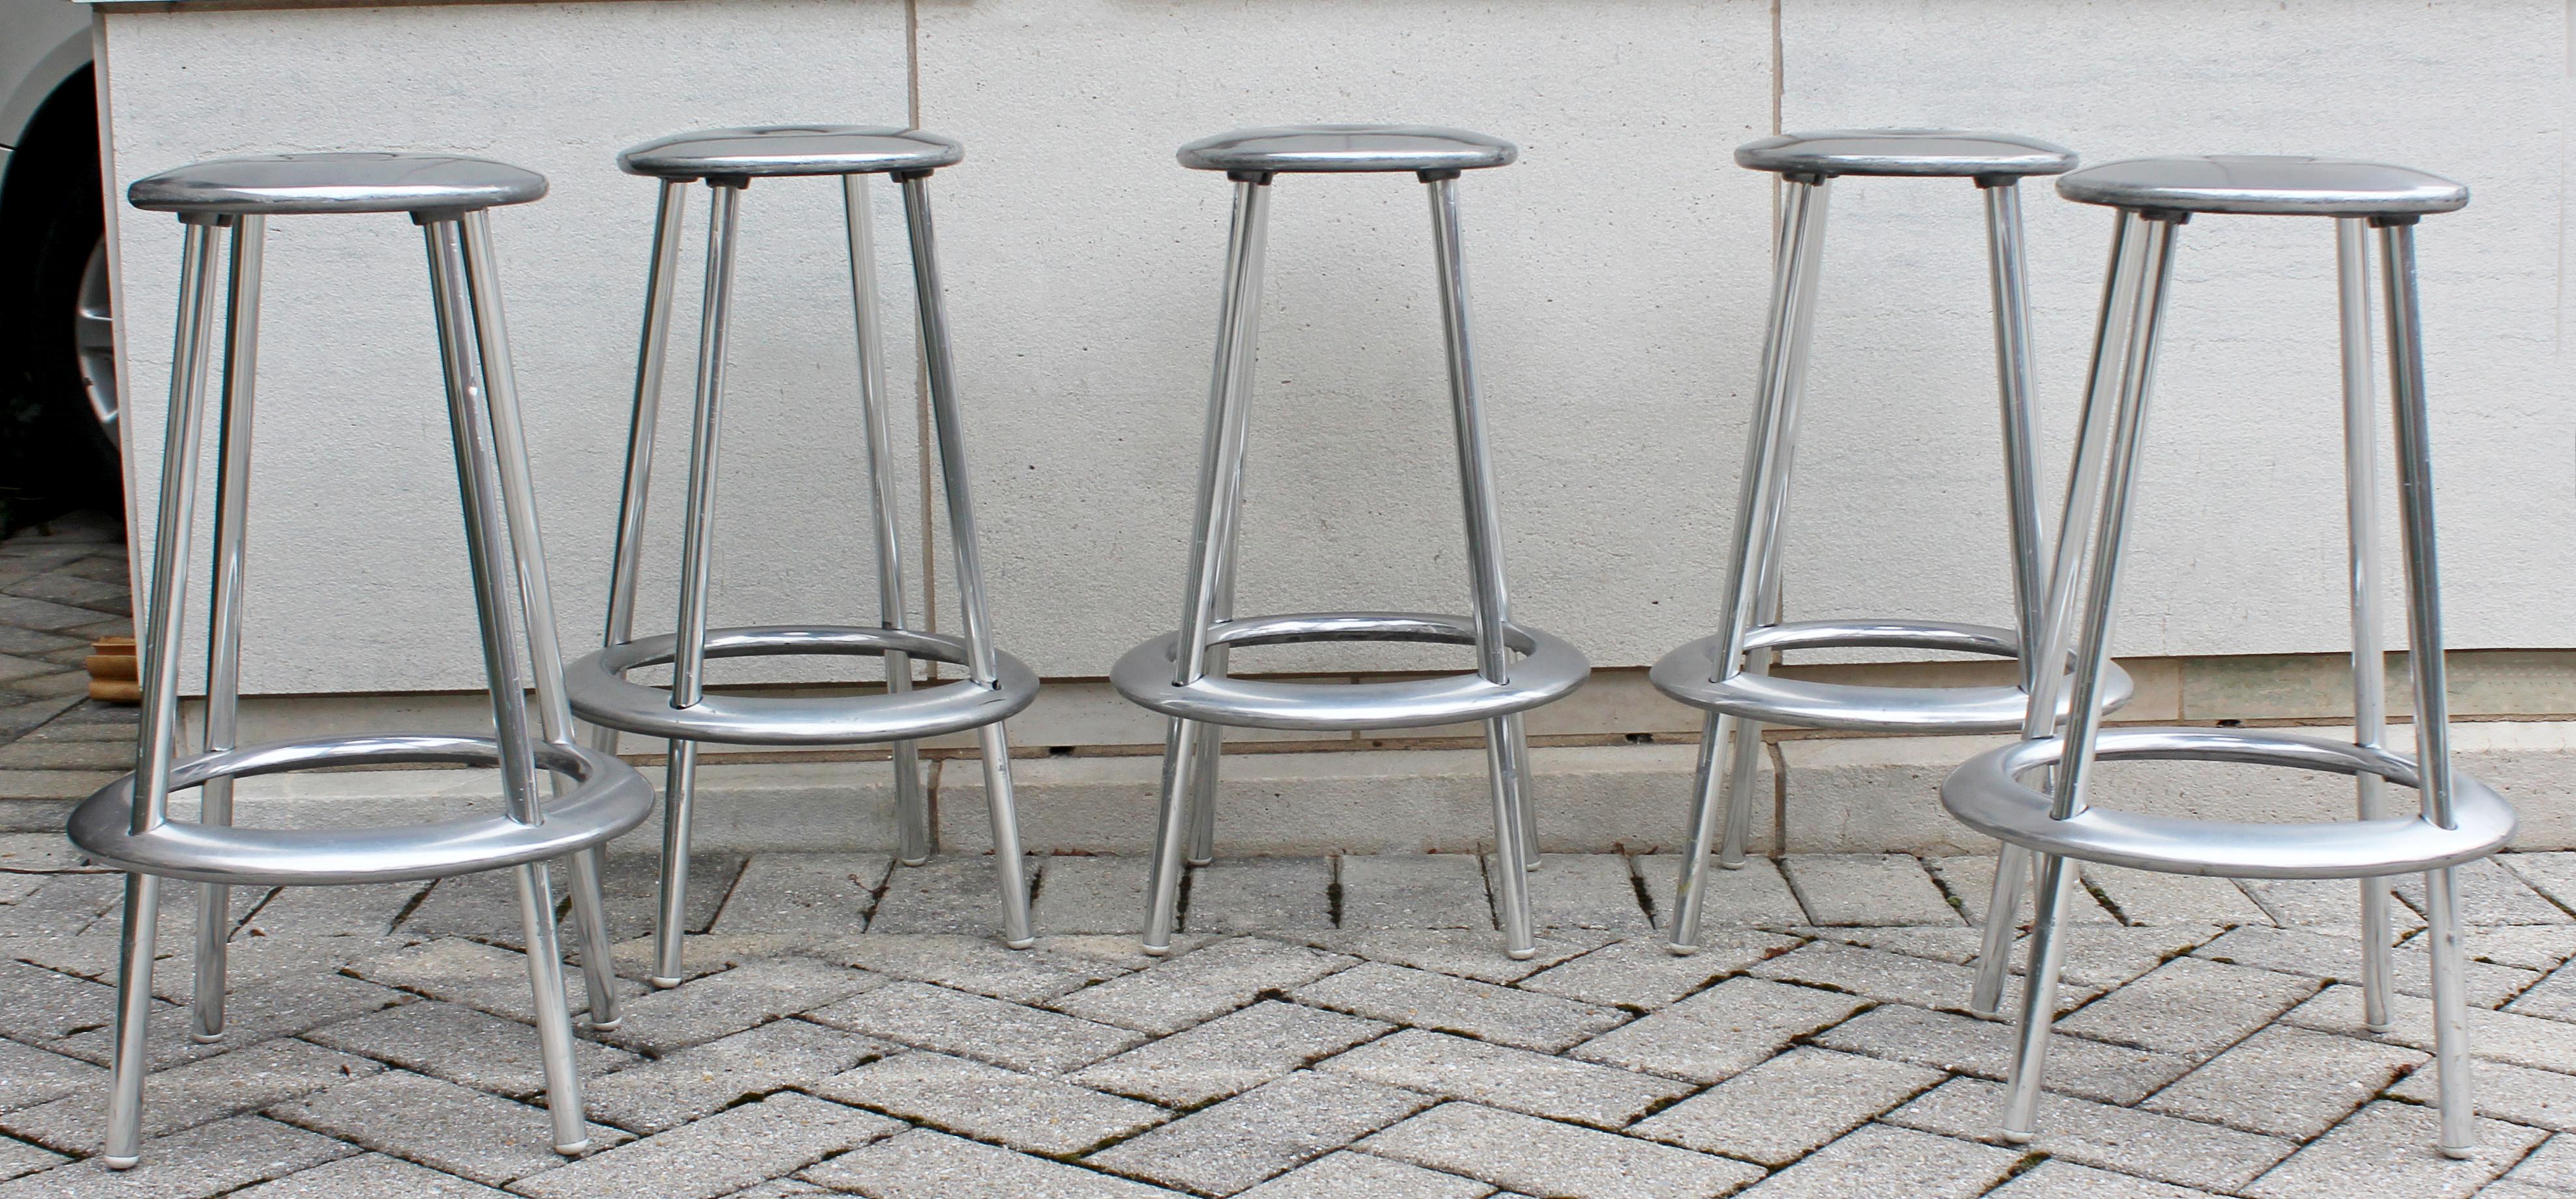 For your consideration is a fantastic set of five counter bar stools, made of polished aluminum the Luna collection by Marchant & Lyndon for Allermuir, circa 1990s. In excellent condition. The dimensions are 29